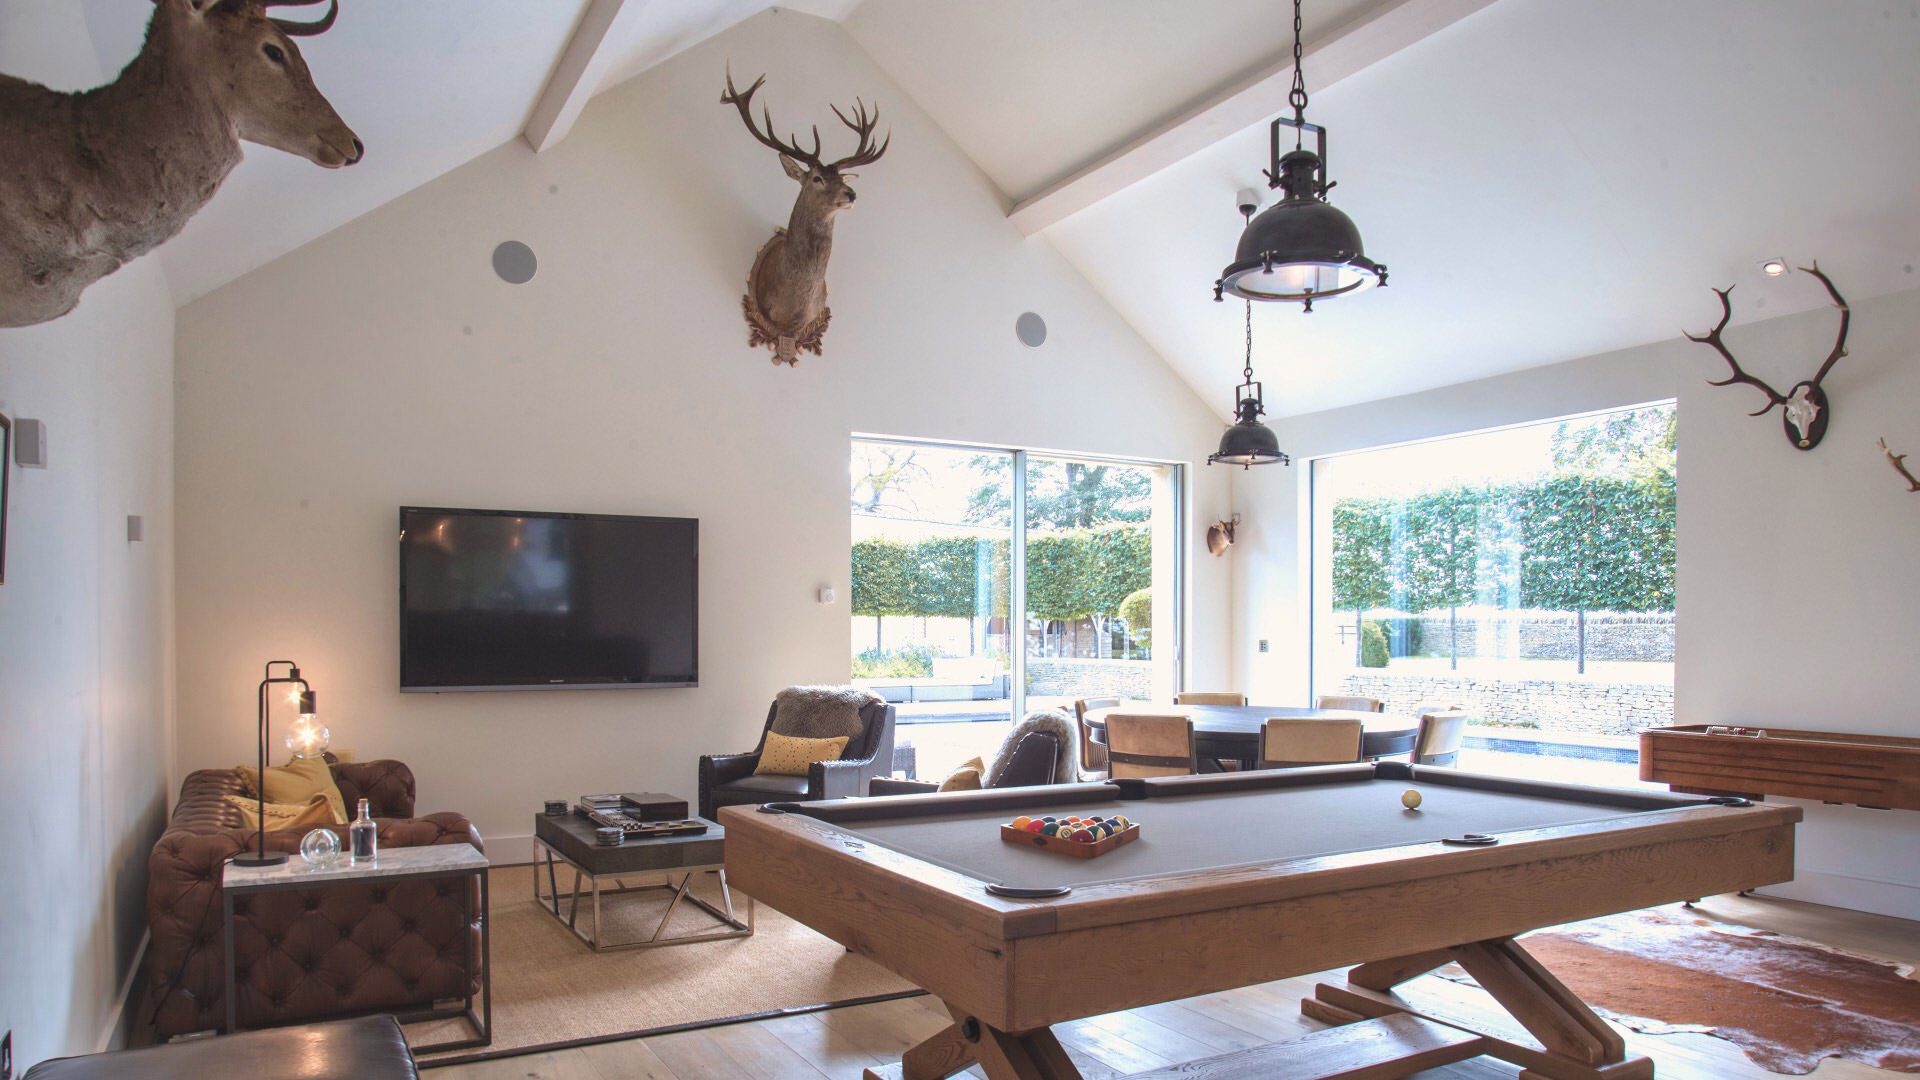 games room at north lodge showing the large format sliding doors